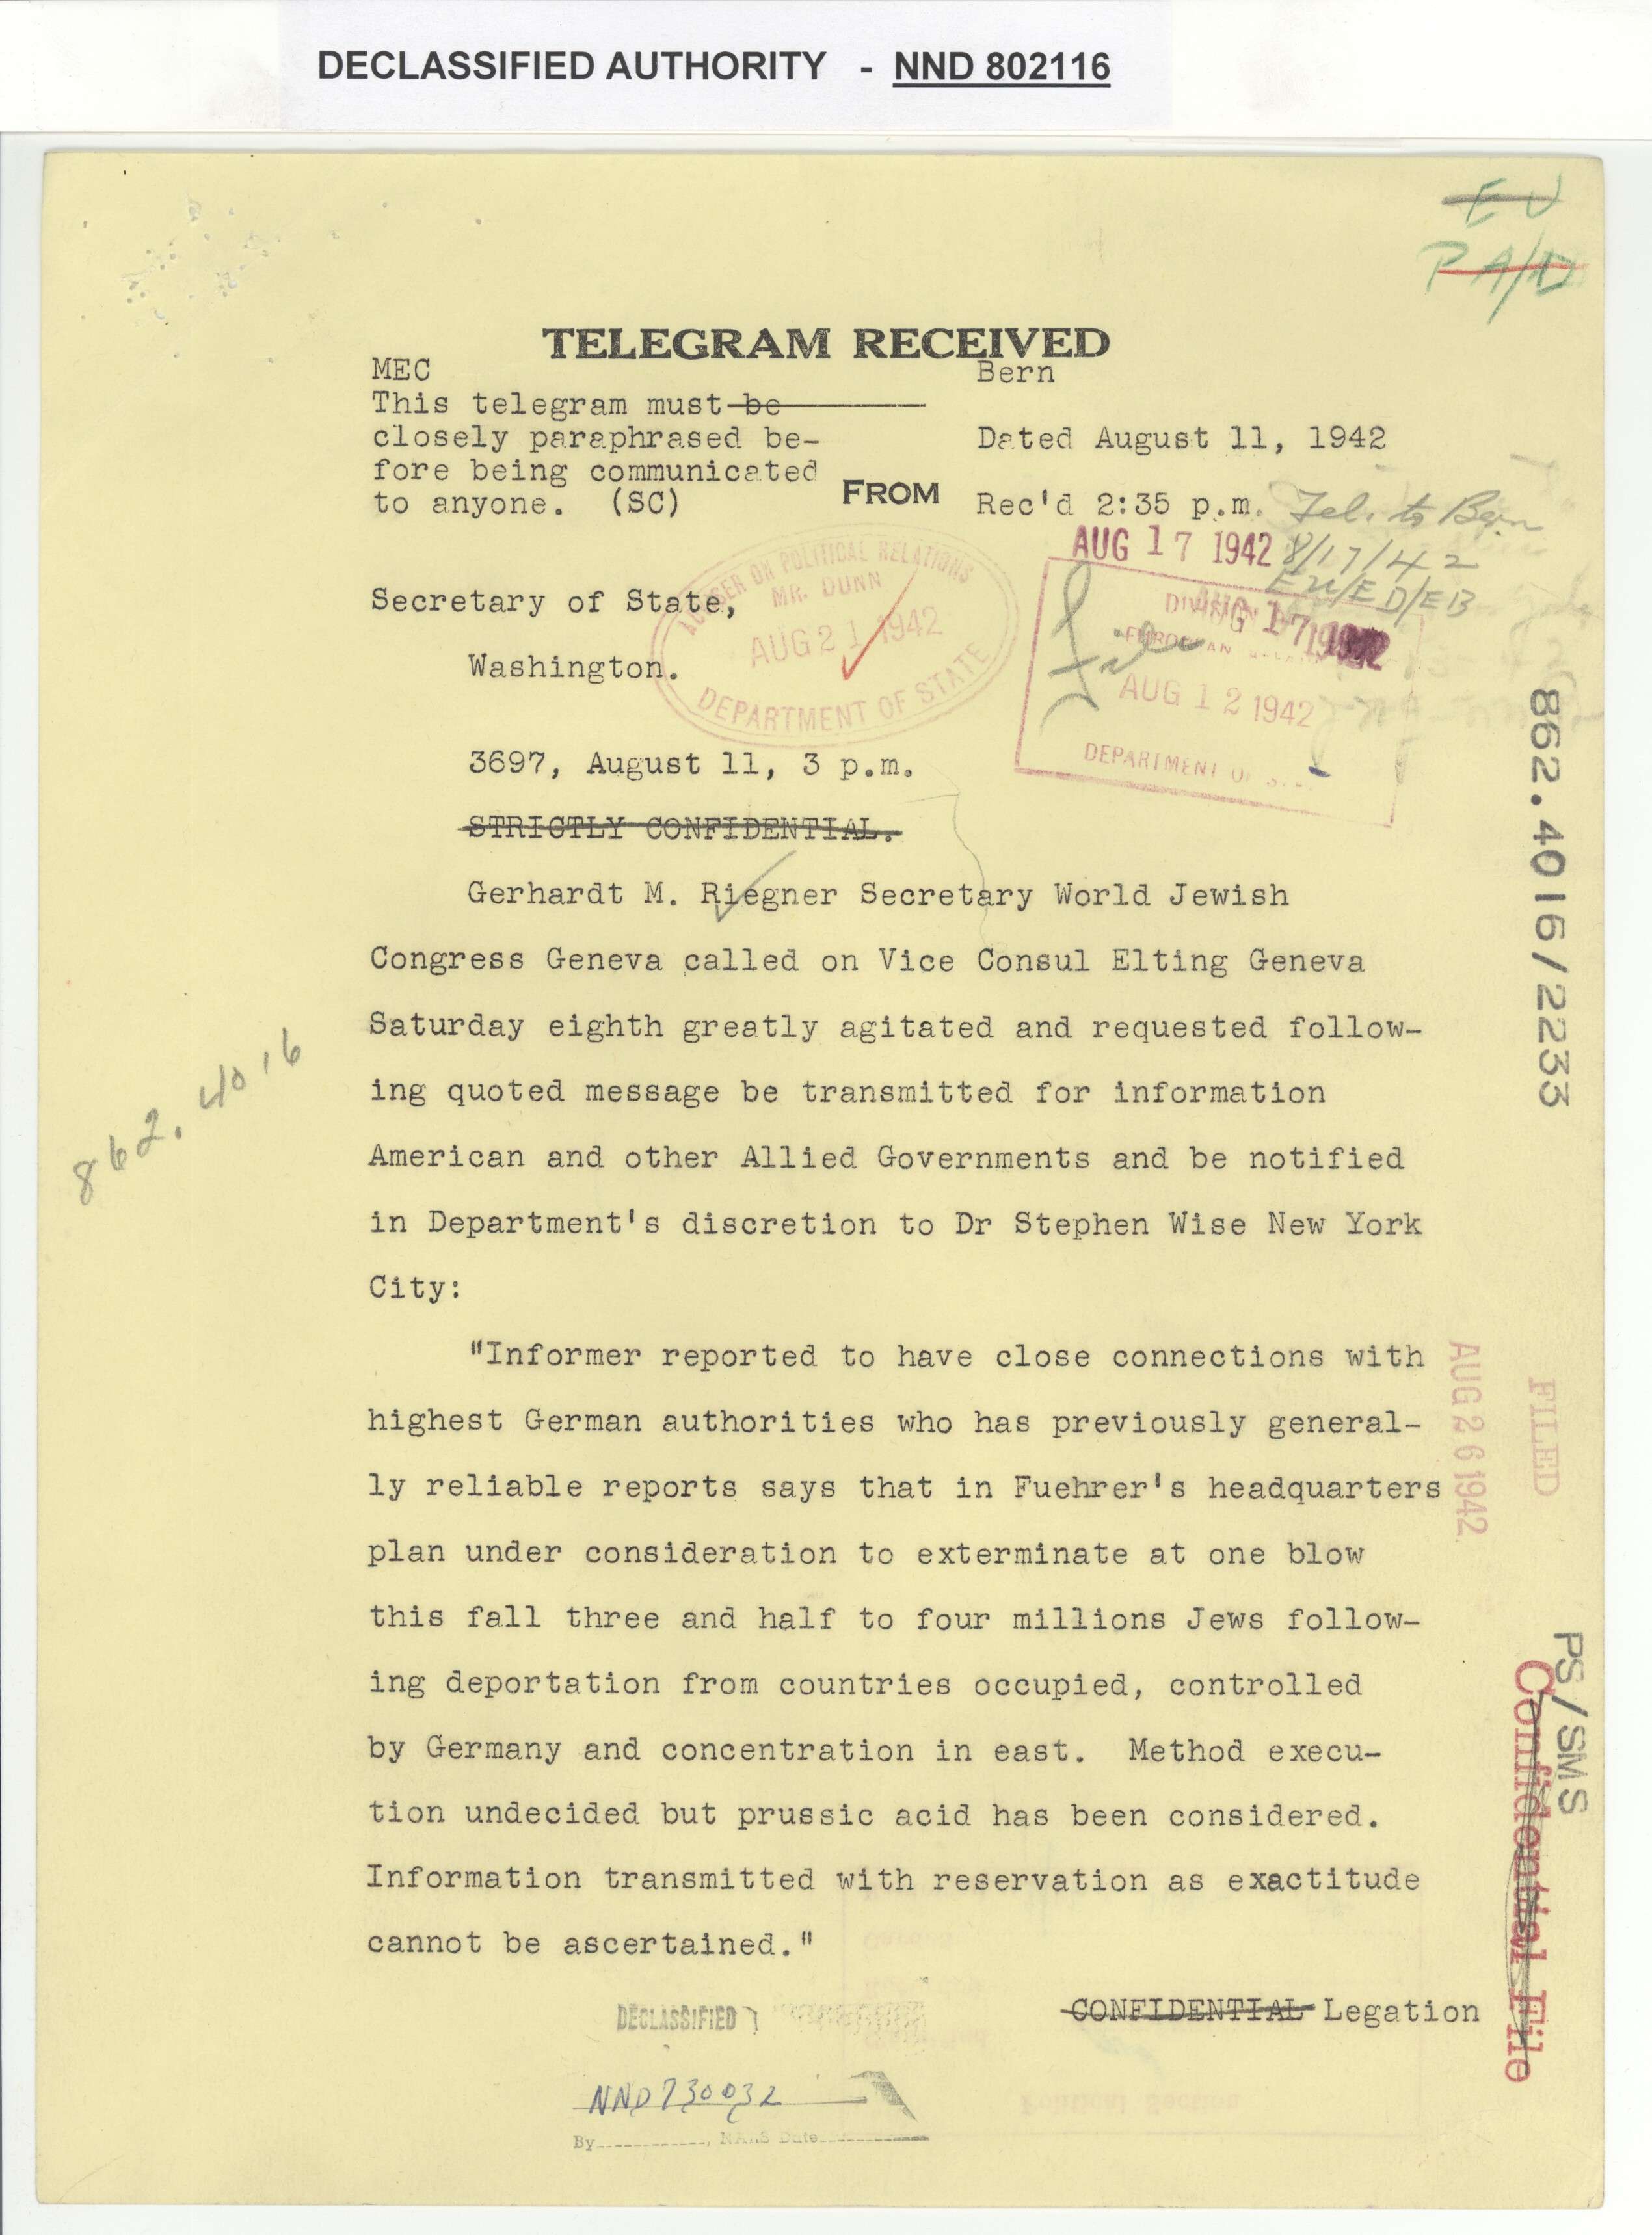 Telegram to Secretary of State from American Legation at Bern, Switzerland with Confidential Note